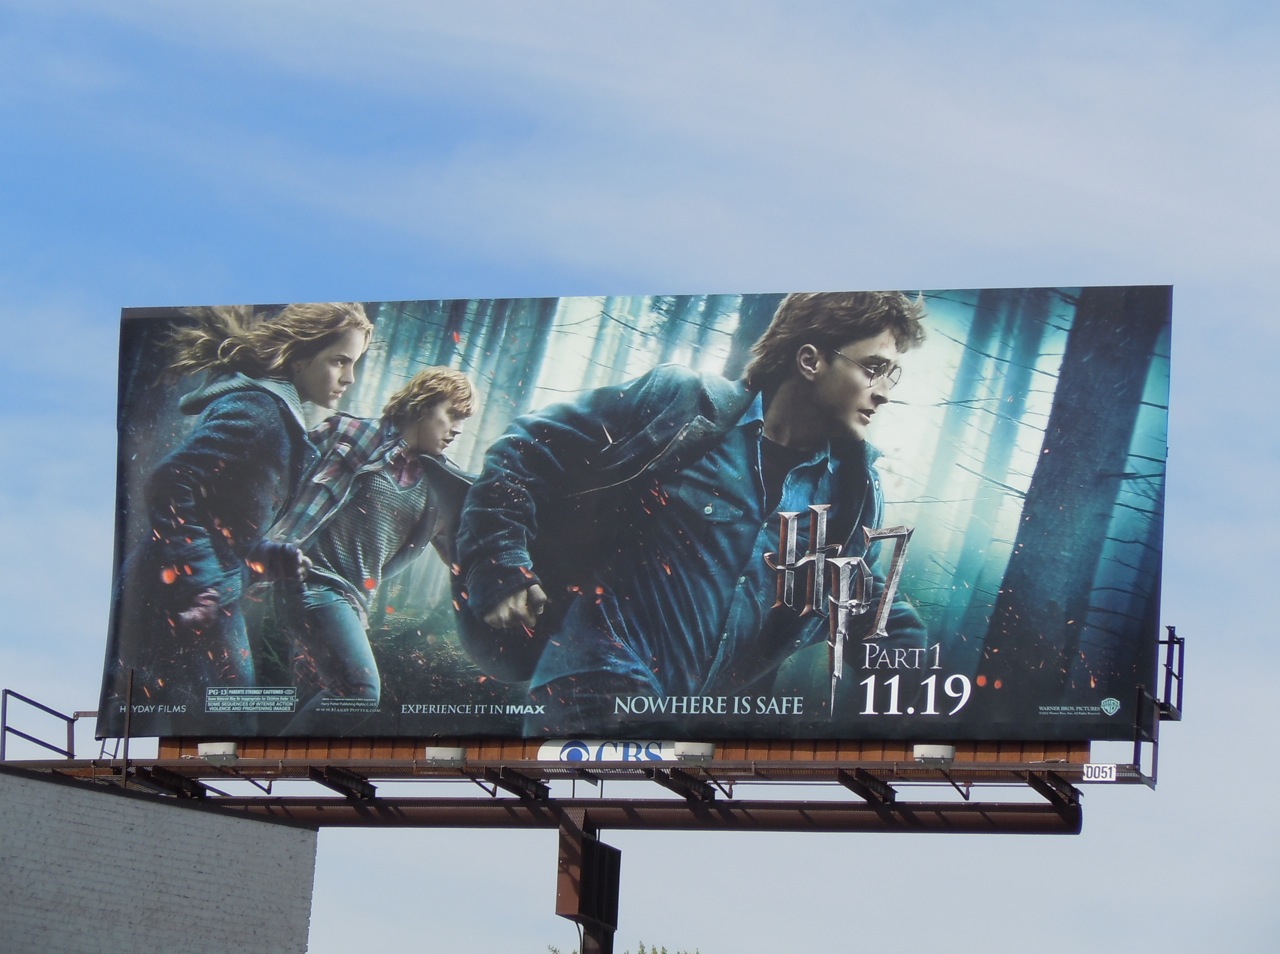 Daily Billboard: Harry Potter 7 Nowhere Is Safe movie billboard... Advertising for ...